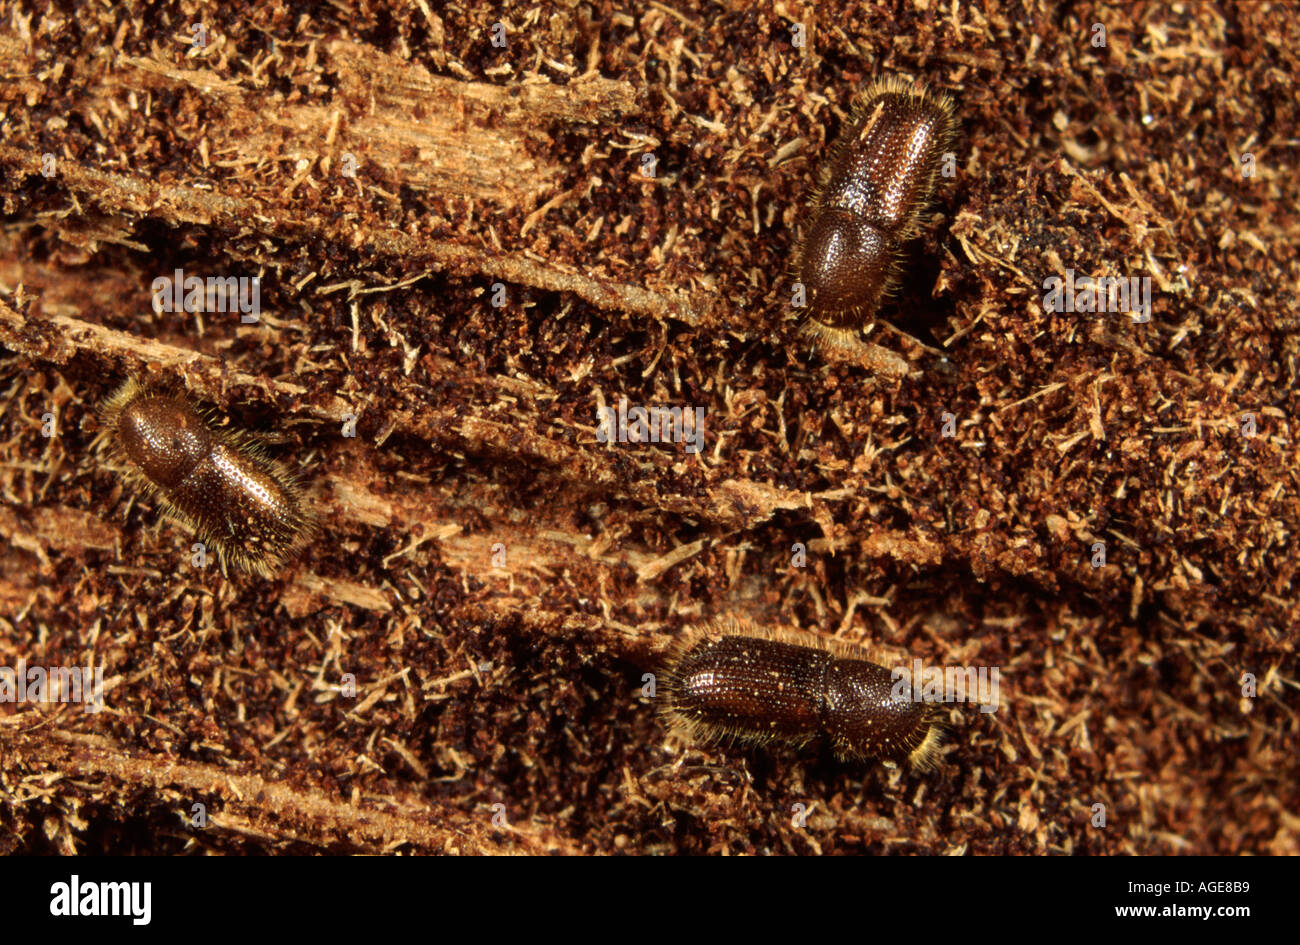 Photomicrograph of ambrosia bark beetles Xyleborus sp. in gallery in dead tree wood Stock Photo